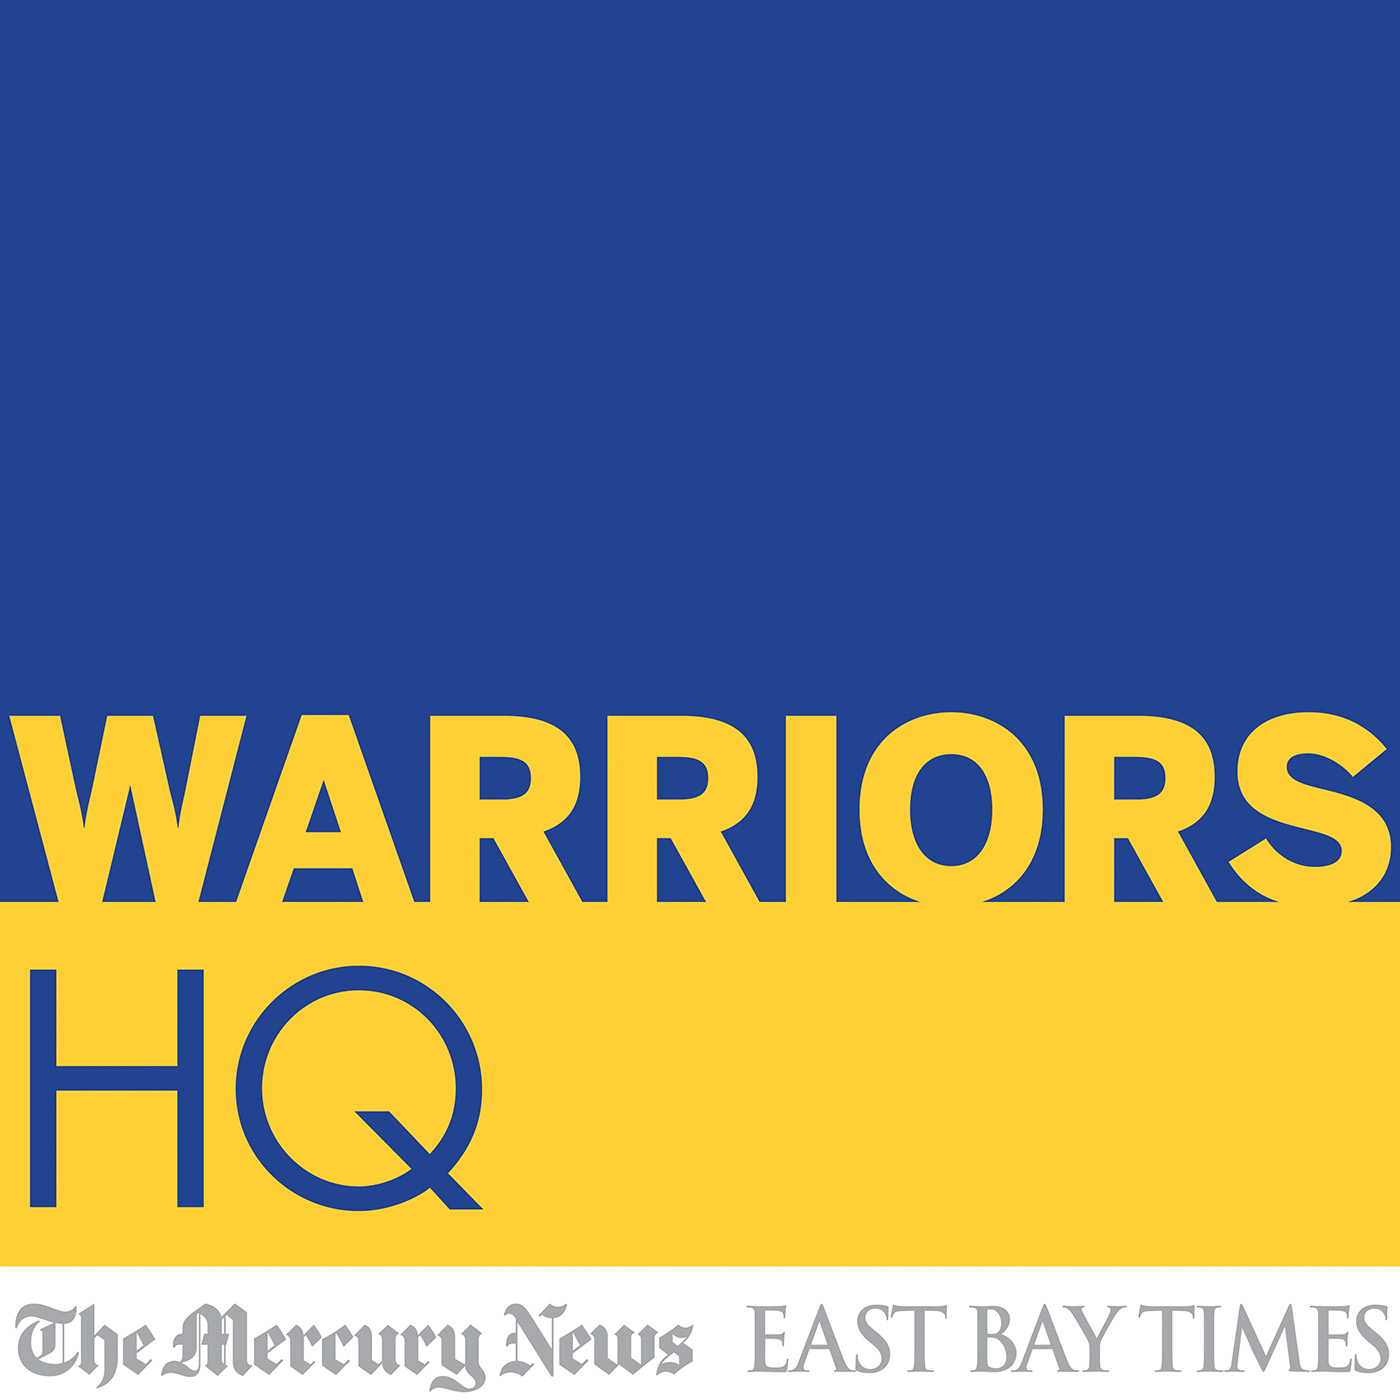 Warriors dominate Clippers in Game 3 of the playoffs